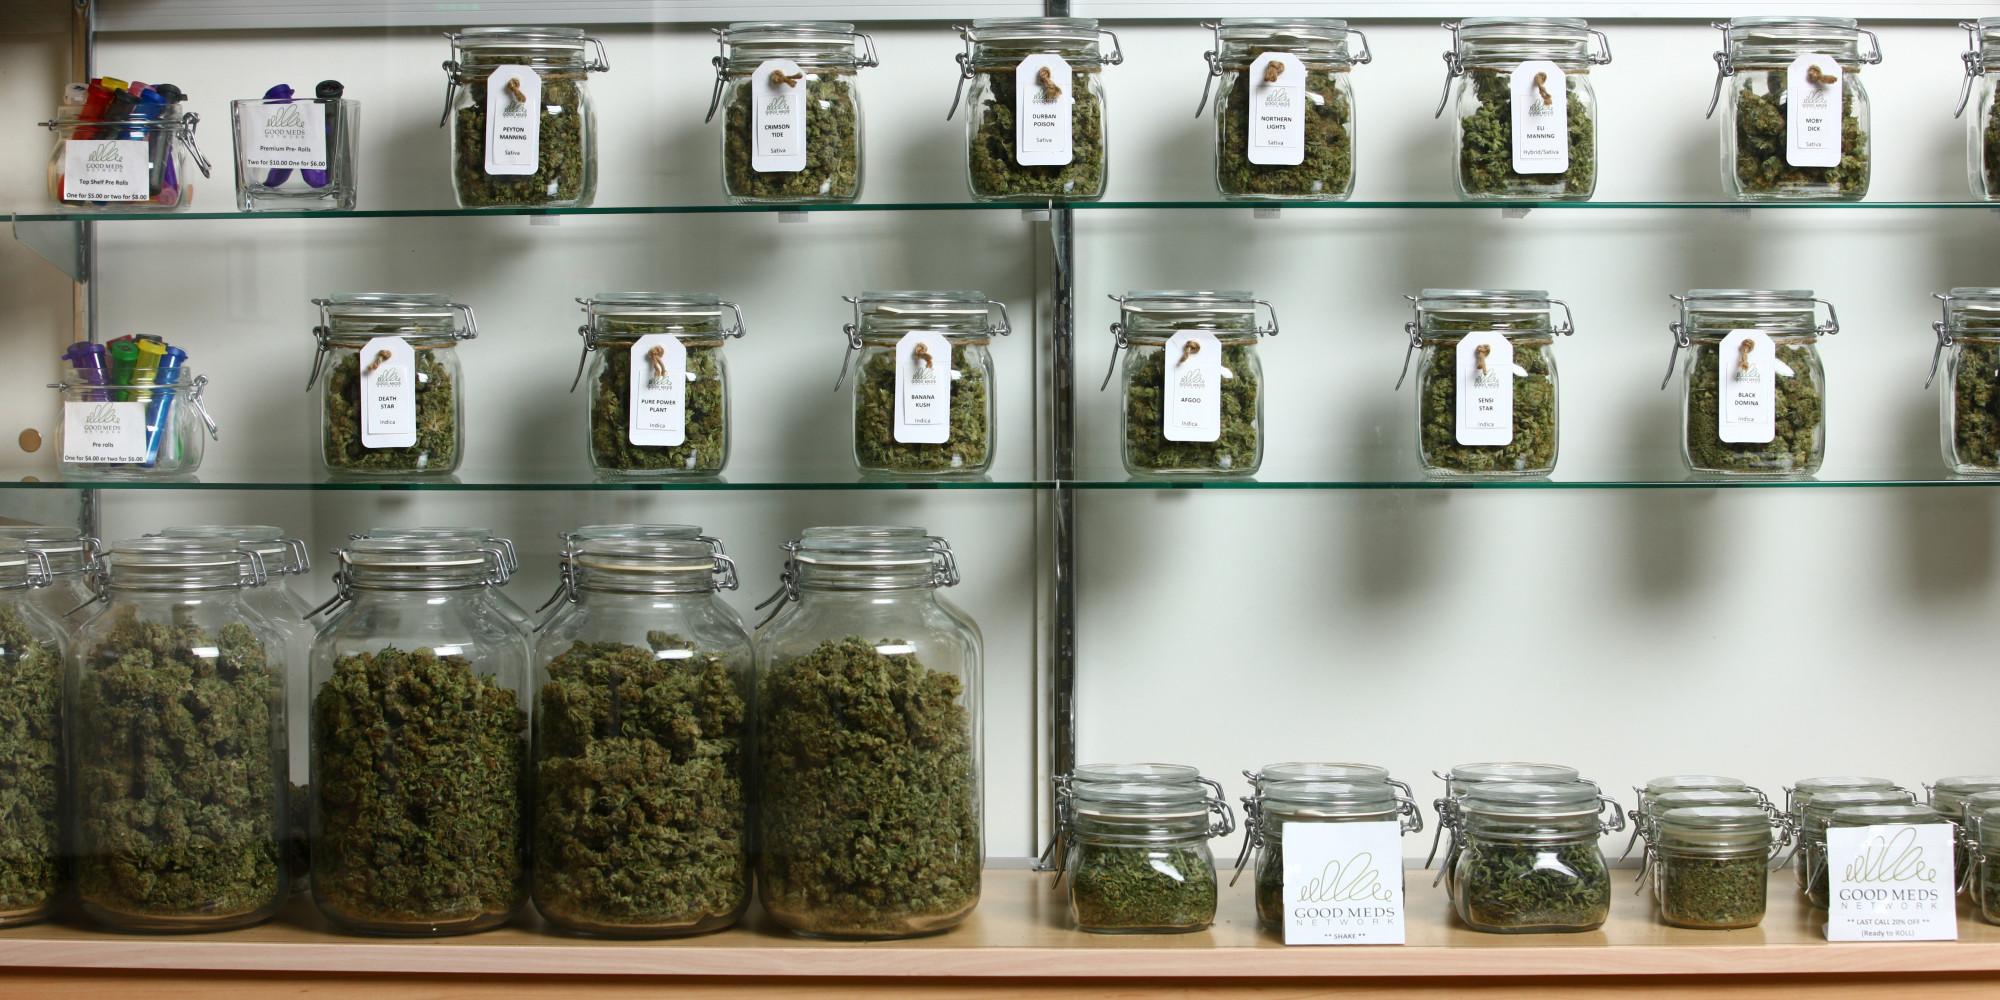 Banks To Get Guidance On Doing Business With Legal Weed Shops | HuffPost